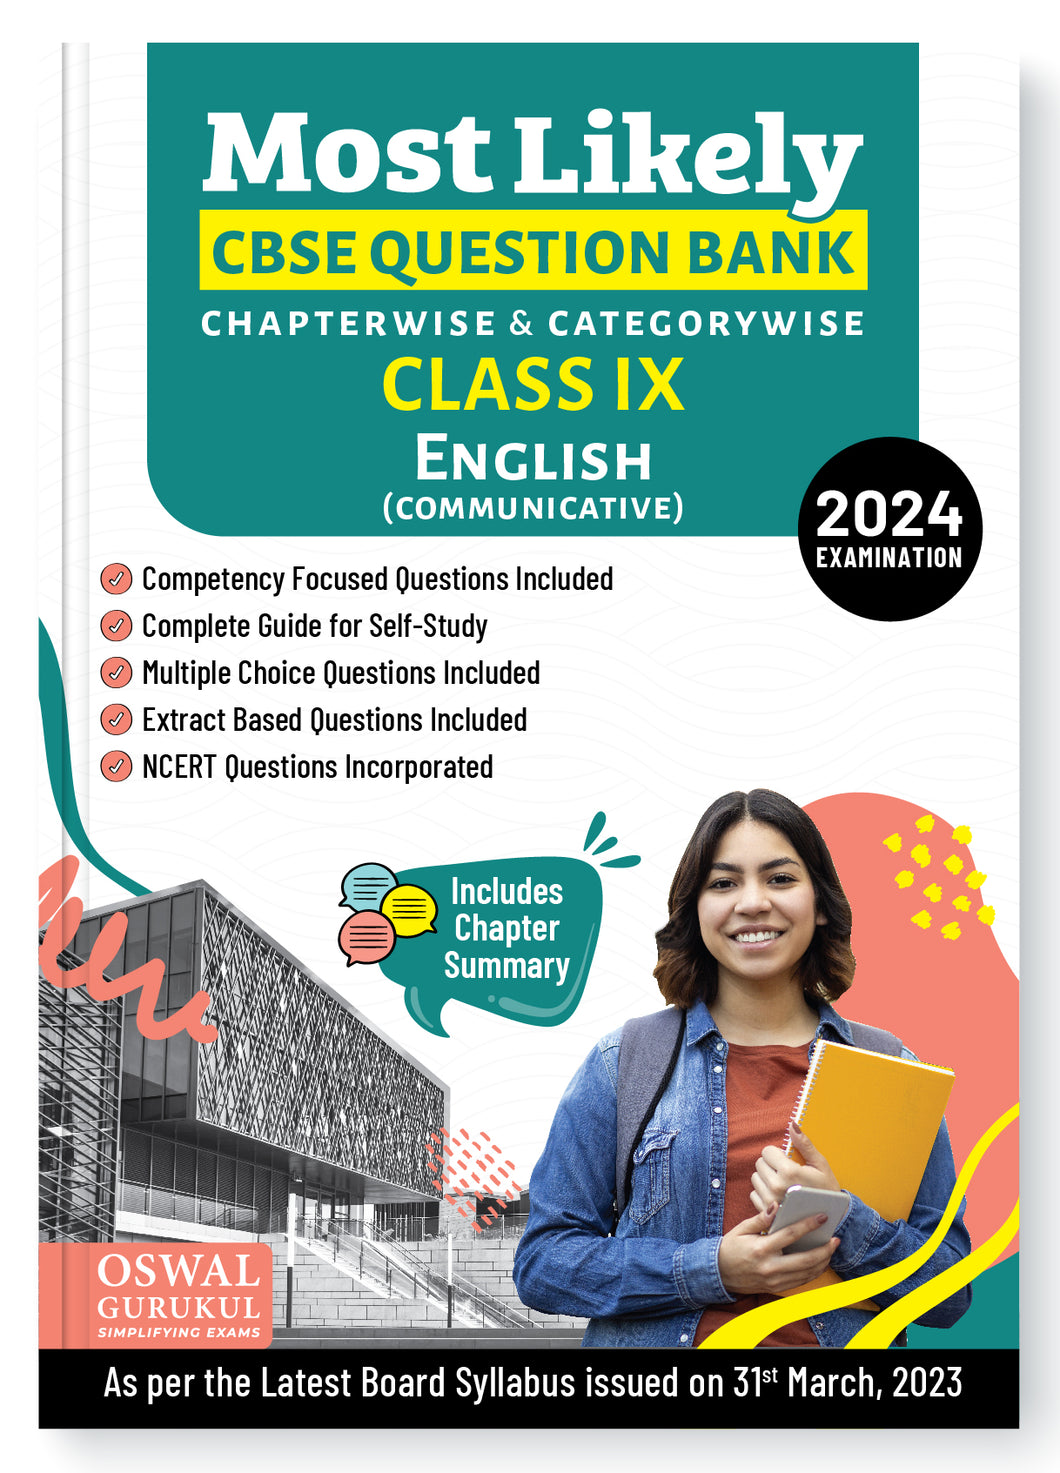 Oswal - Gurukul English Communicative Most Likely CBSE Question Bank for Class 9 Exam 2024 - Chapterwise & Categorywise, New Paper Pattern (MCQs, Extract Based, NCERT Questions), Self Study Guide